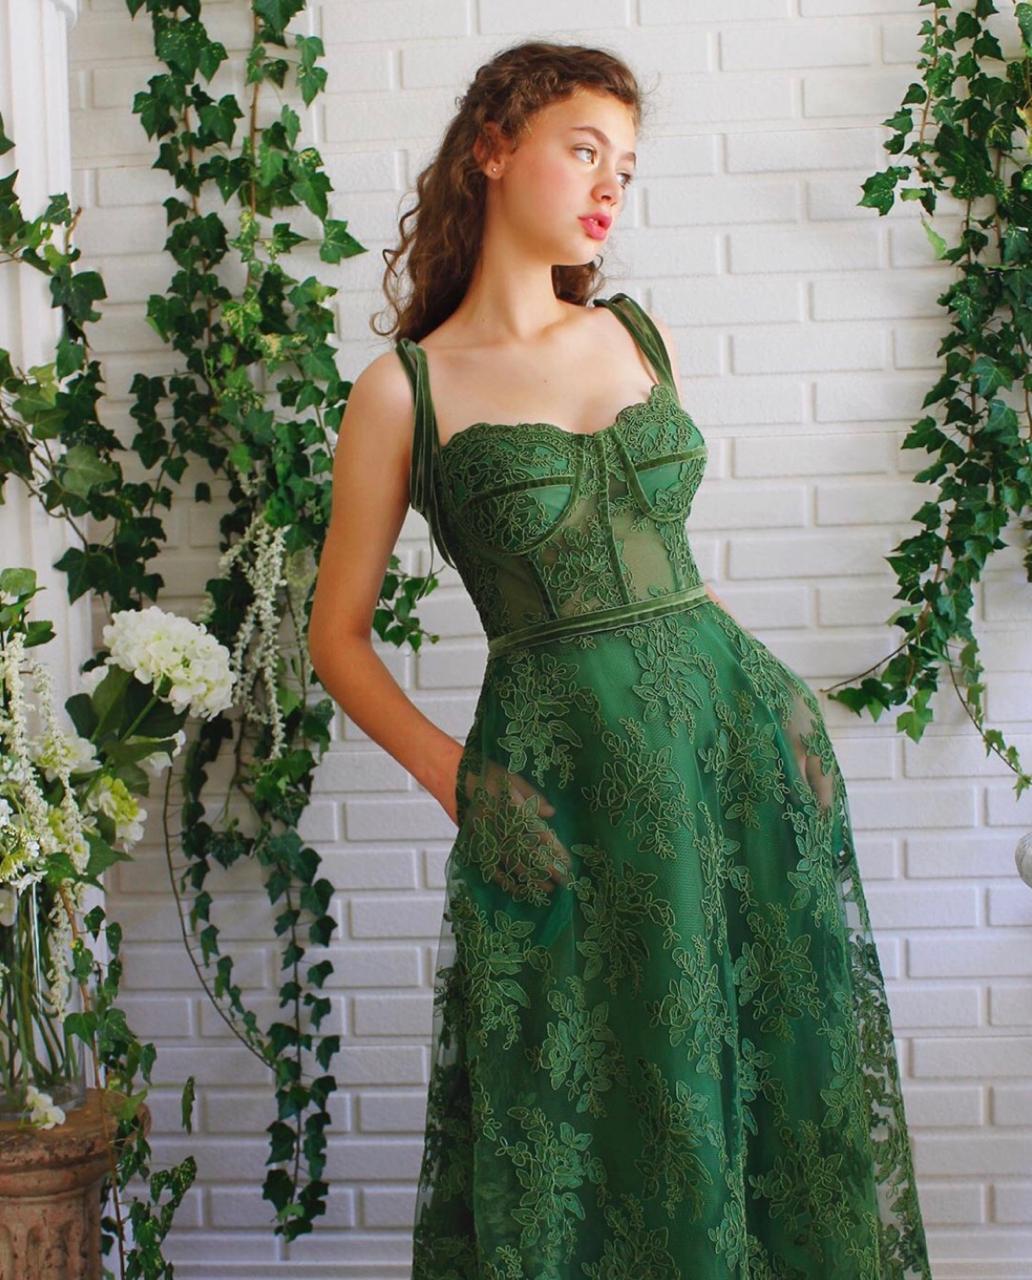 Green A-Line dress with lace and spaghetti straps